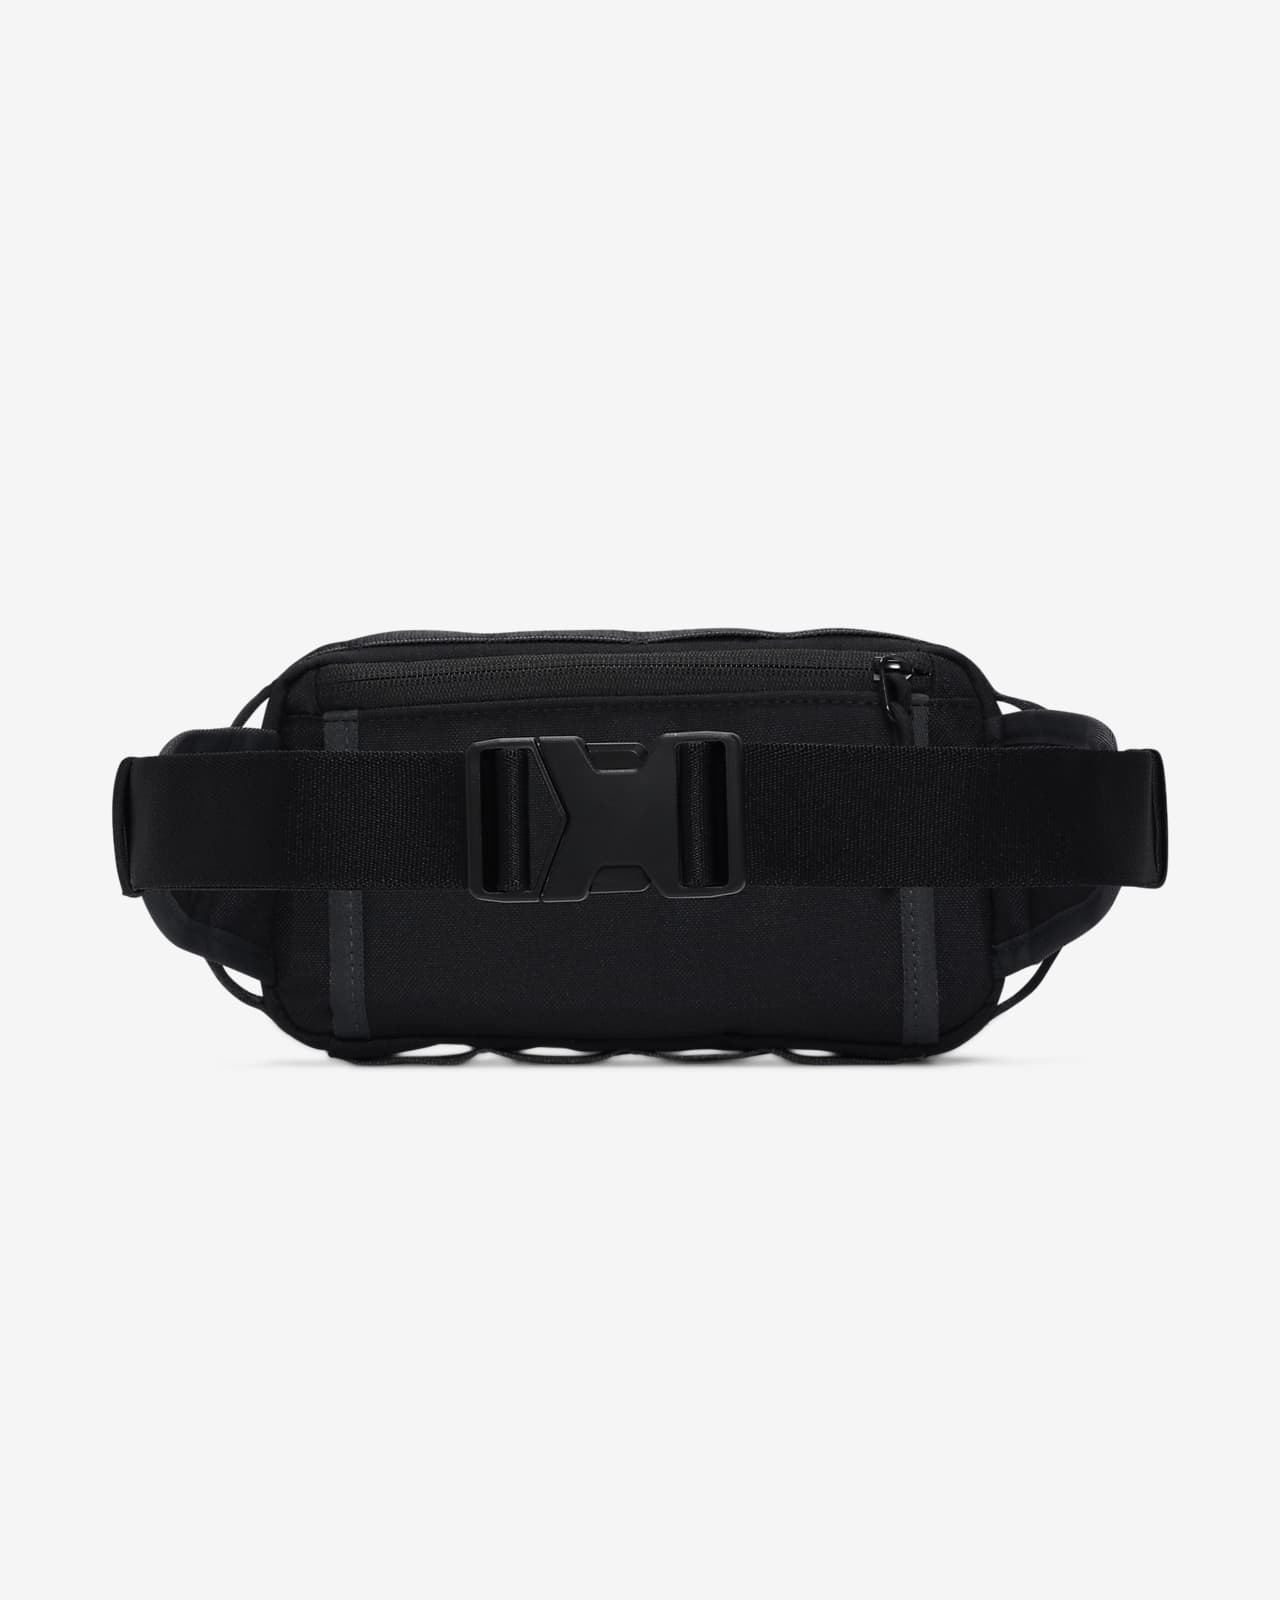 Nike Utility Speed Hip Pack (2L)